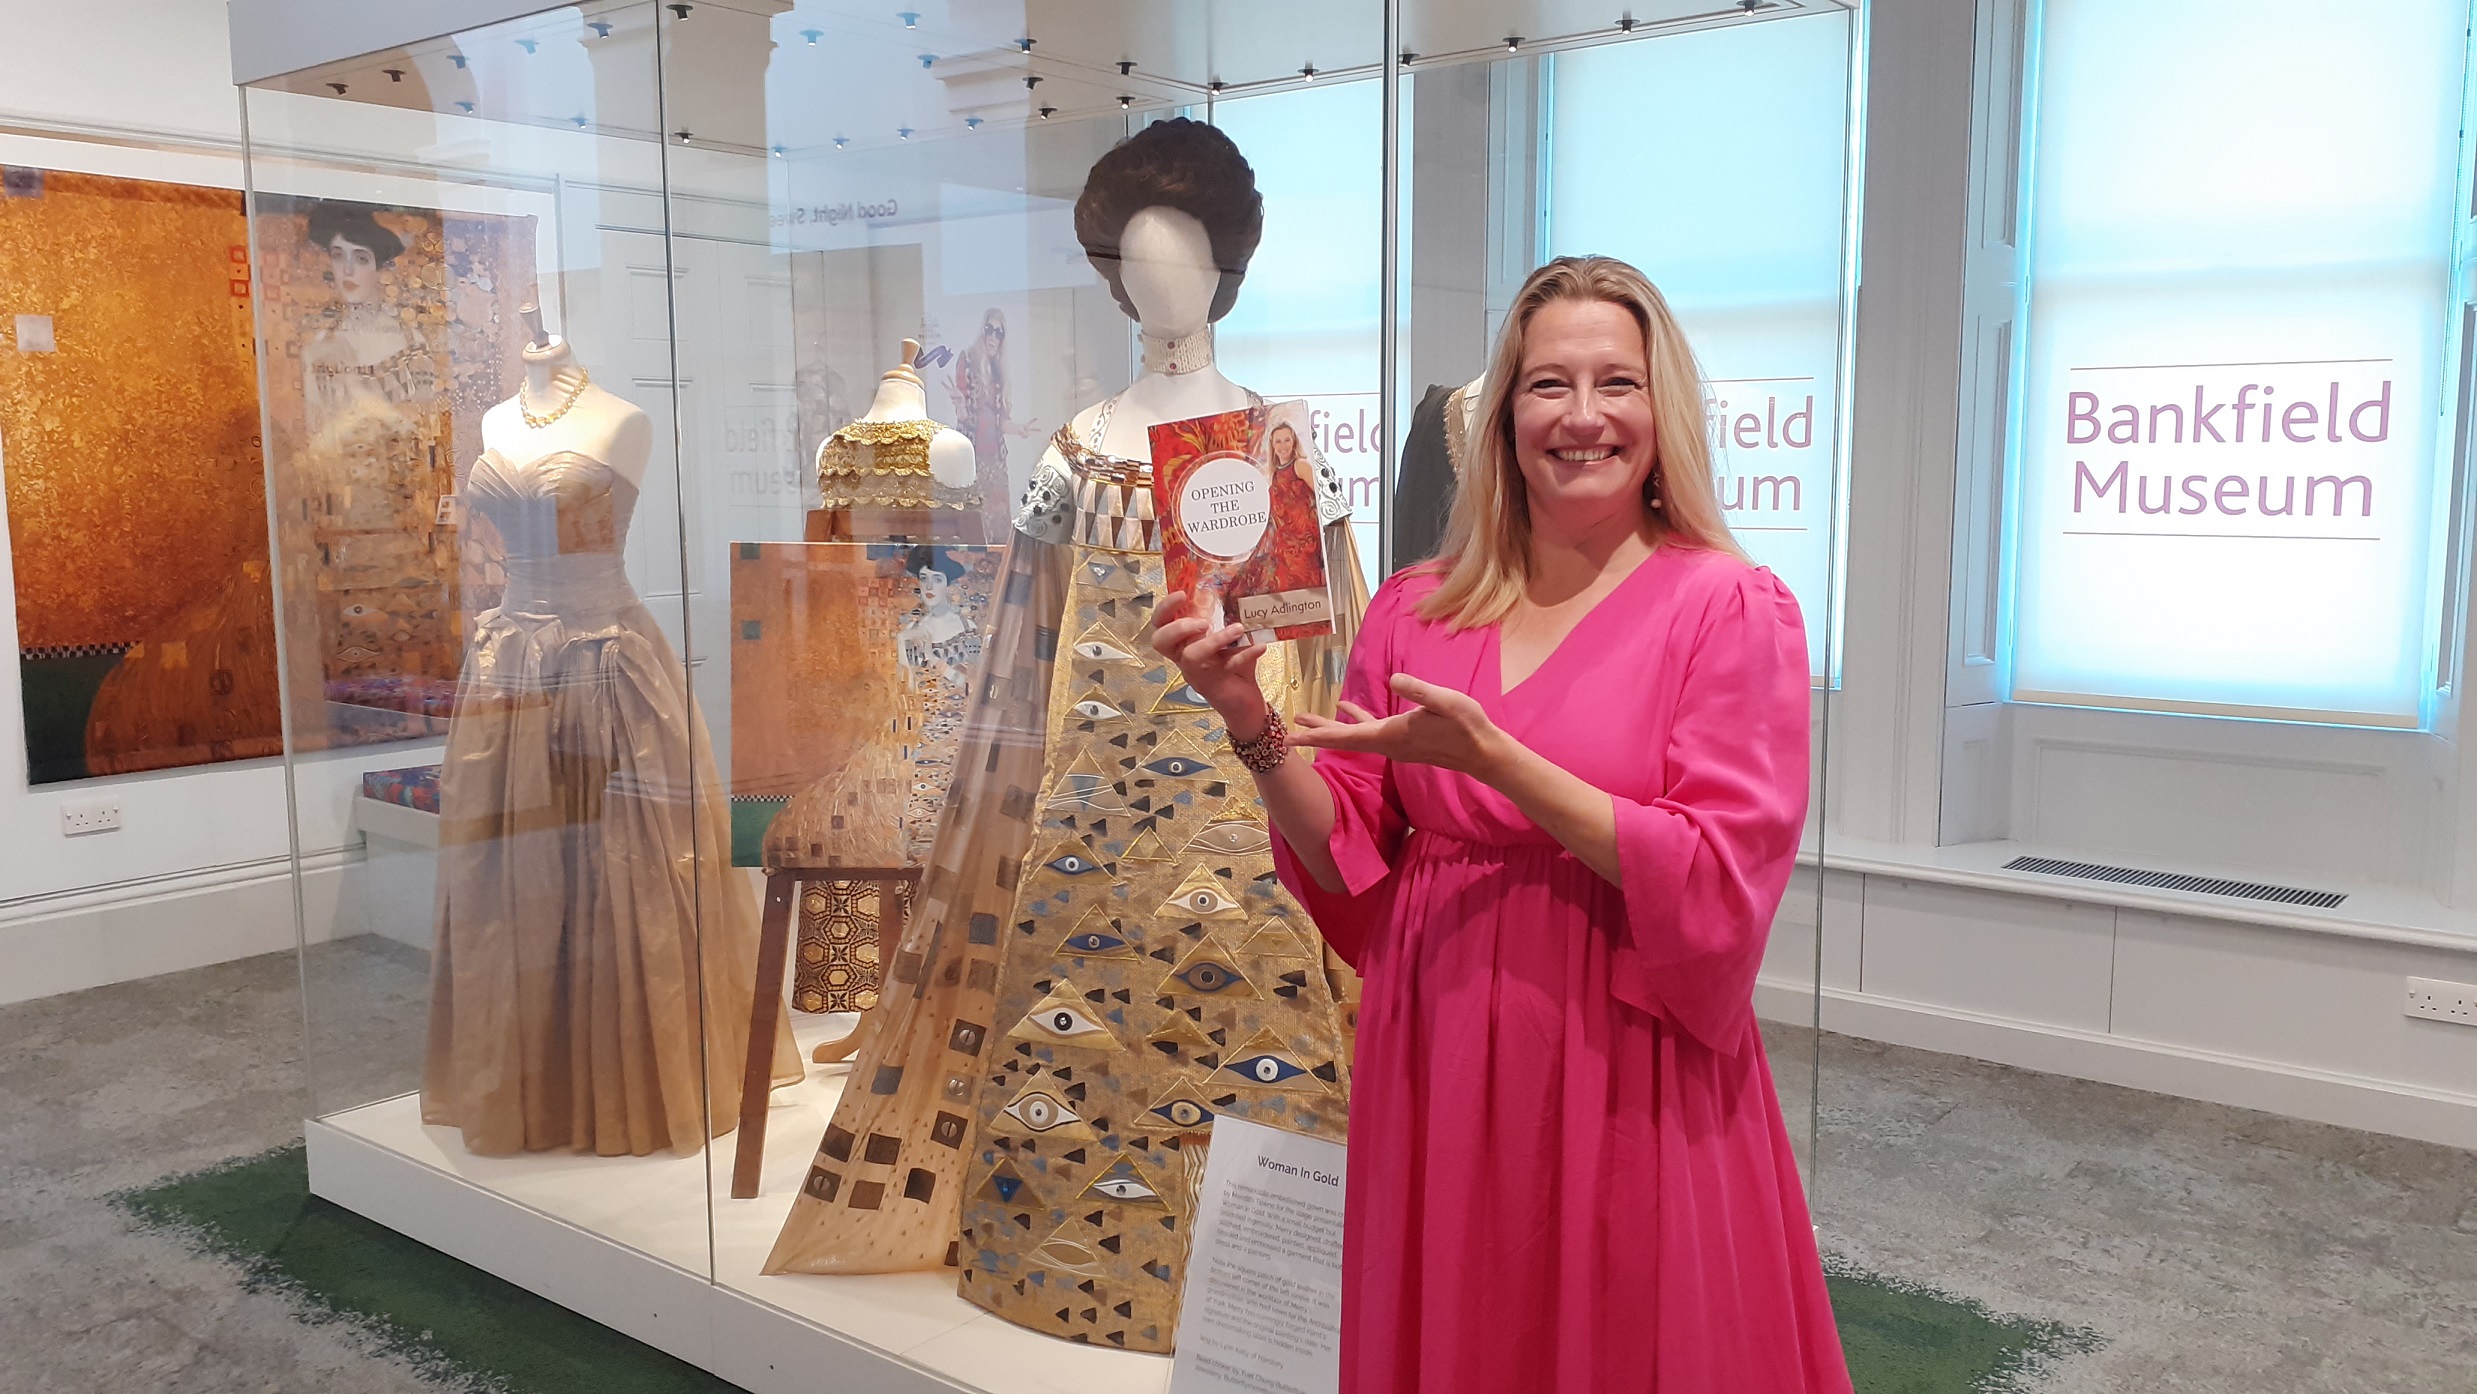 Lucy Adlington at Bankfield Museum in front of glass case containing dresses